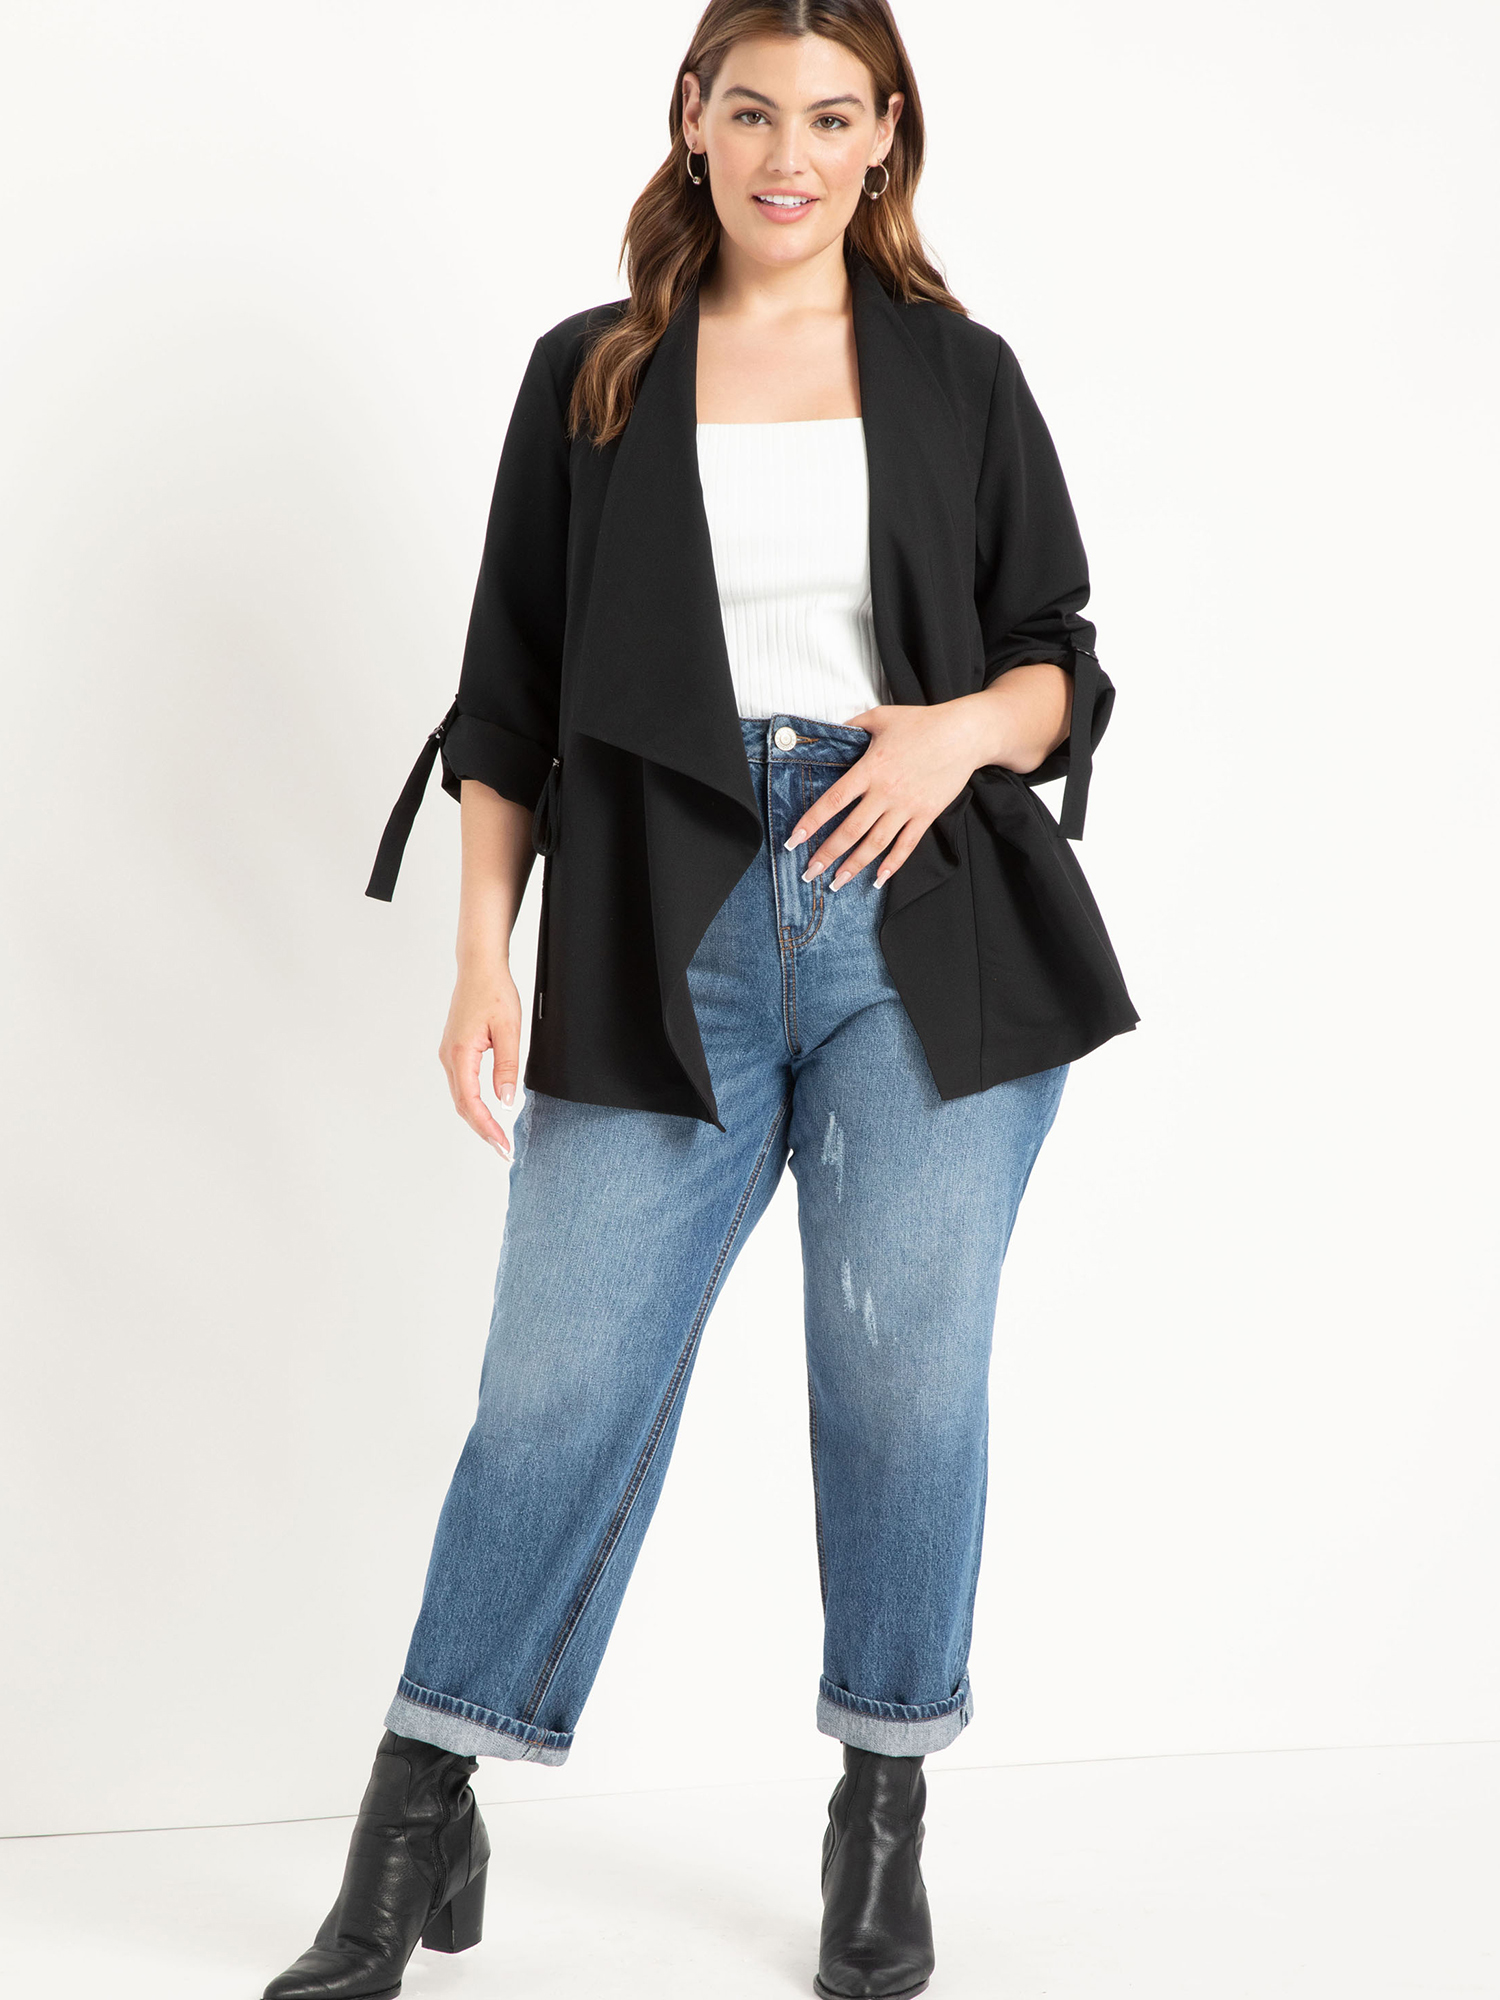 ELOQUII Elements Plus Size Utility Jacket with Waterfall Front - image 4 of 4